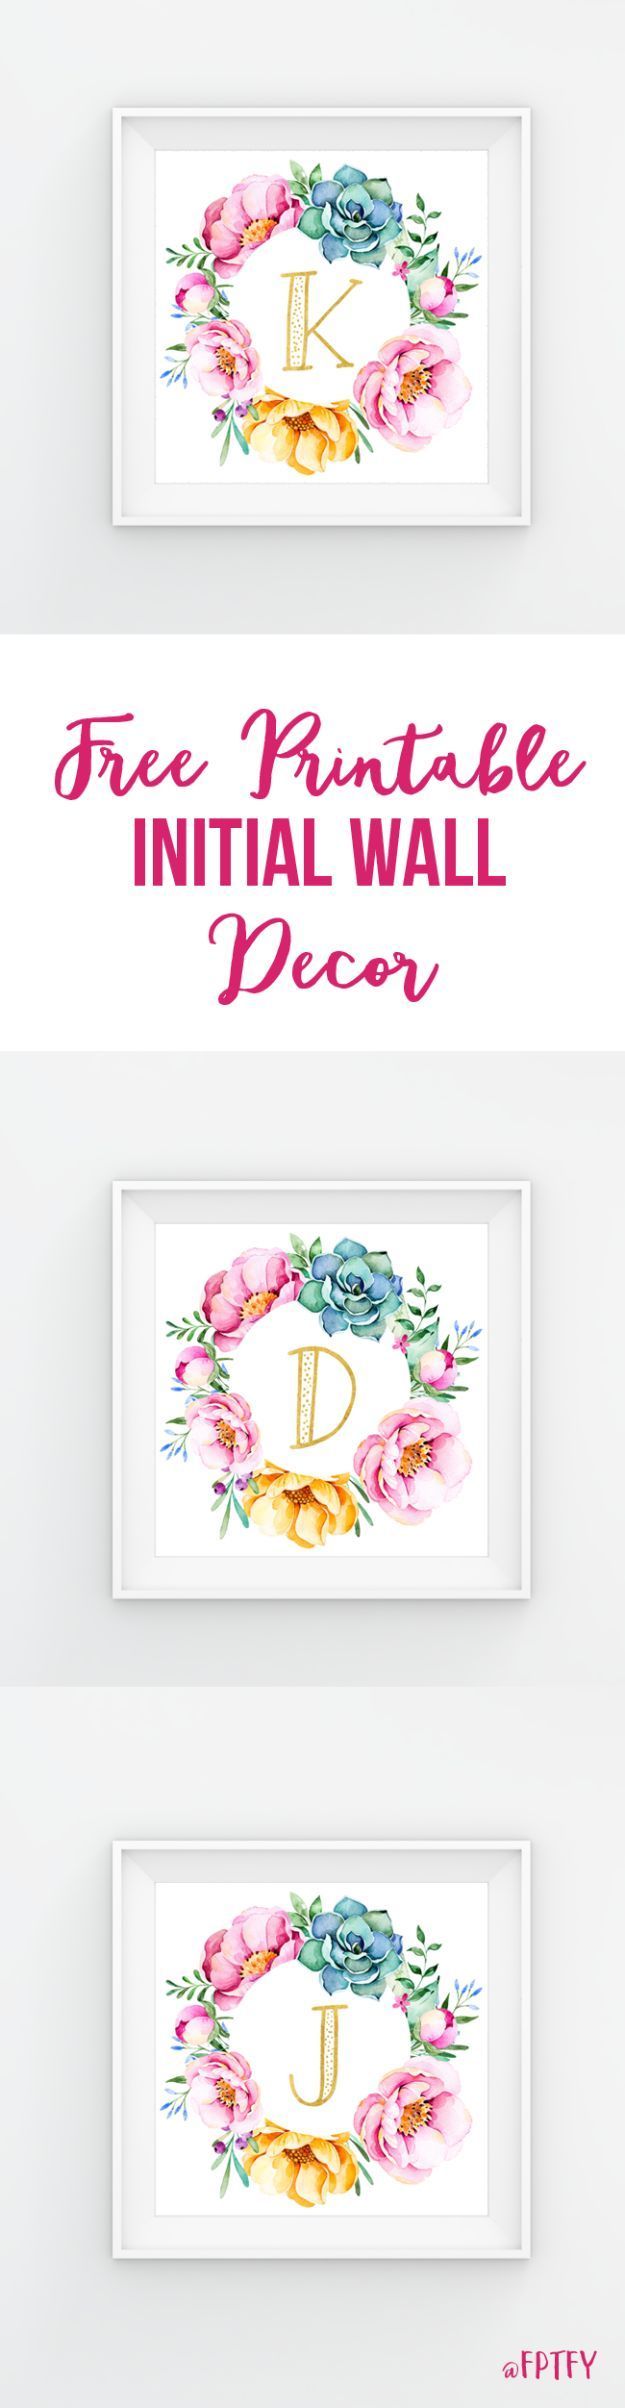 75 Best Free Printables for Your Walls